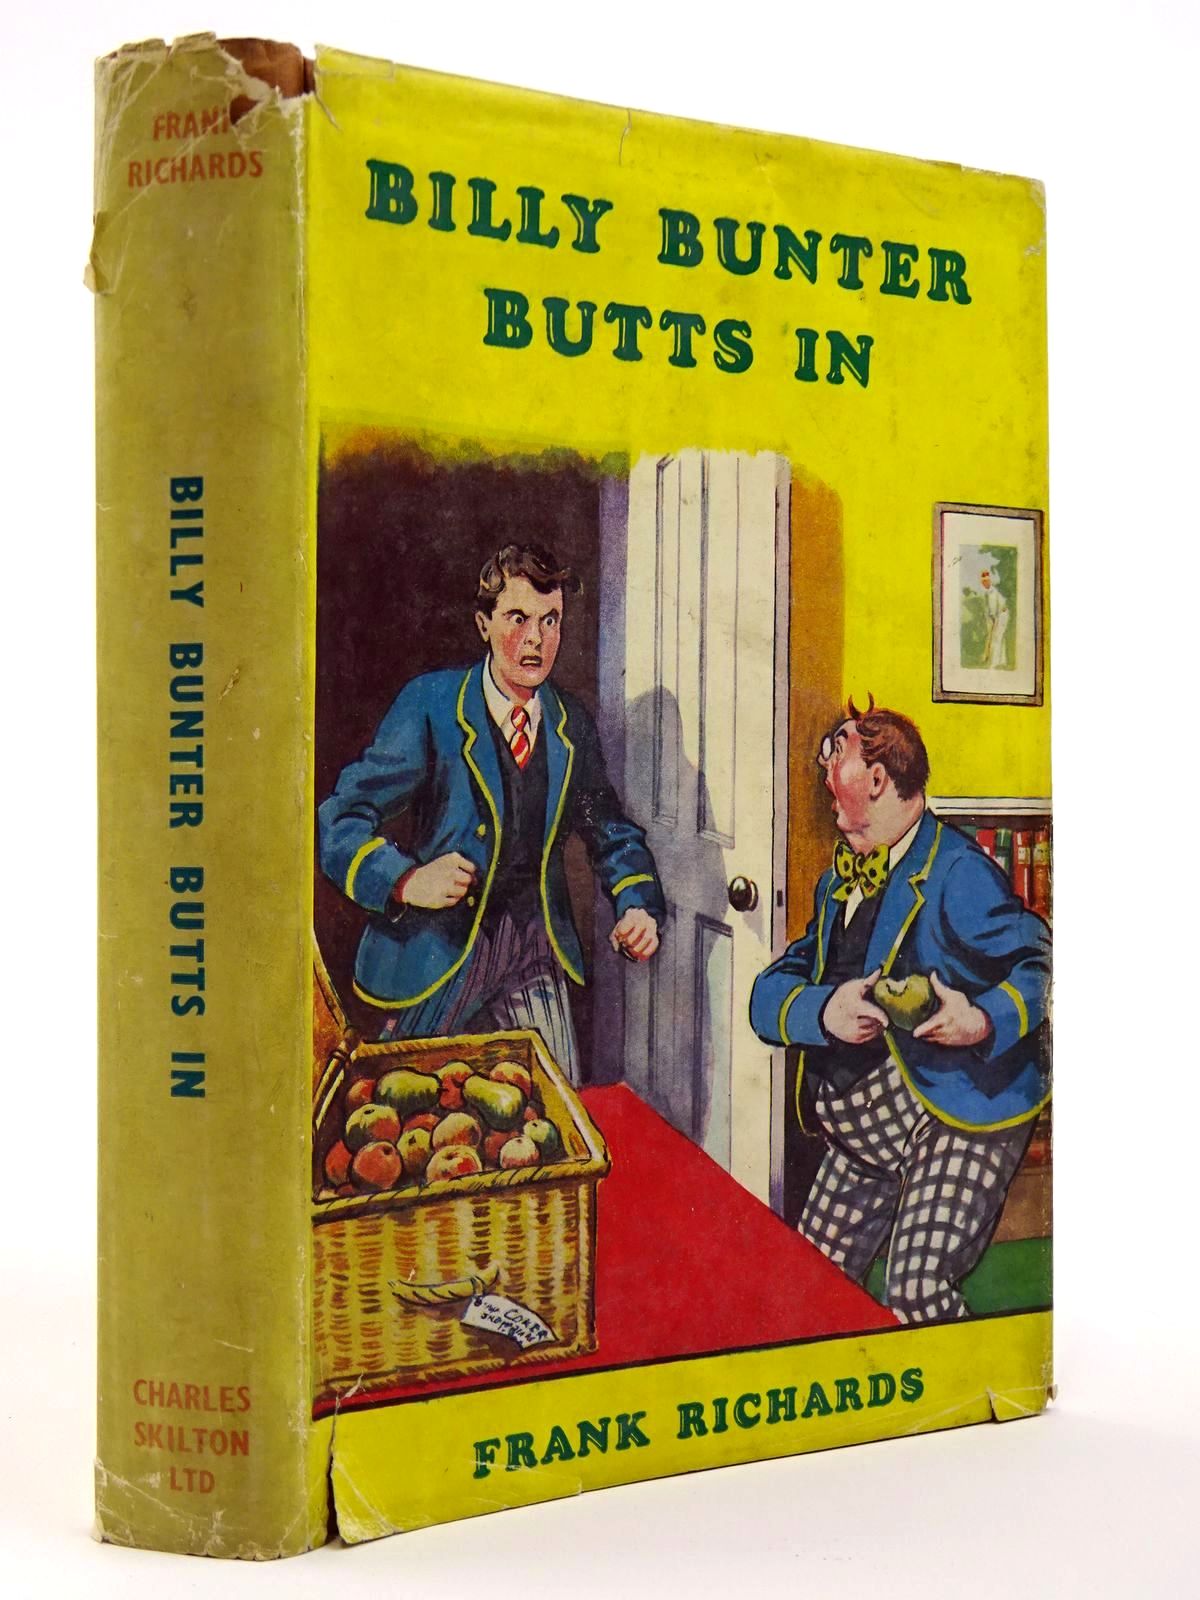 Photo of BILLY BUNTER BUTTS IN written by Richards, Frank illustrated by Macdonald, R.J. published by Charles Skilton Ltd. (STOCK CODE: 2129410)  for sale by Stella & Rose's Books